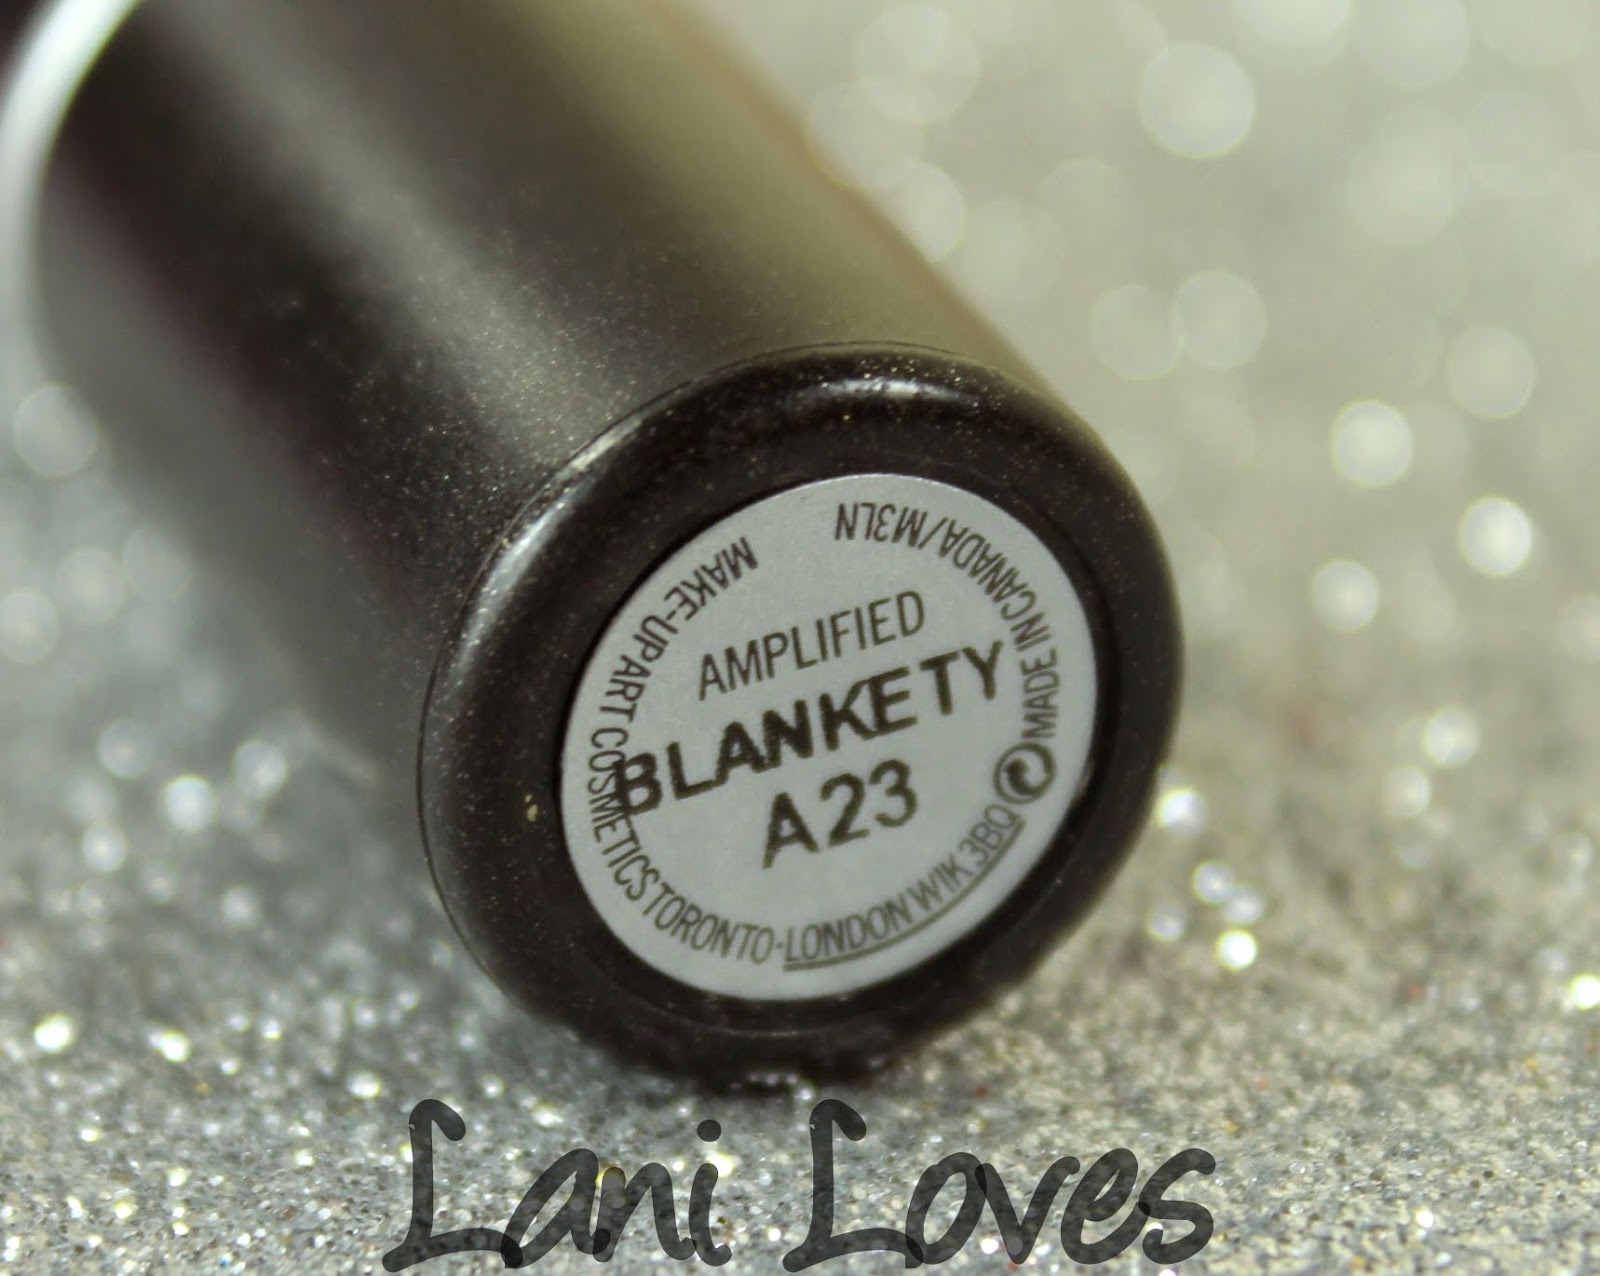 MAC Blankety Lipstick Swatches & Review